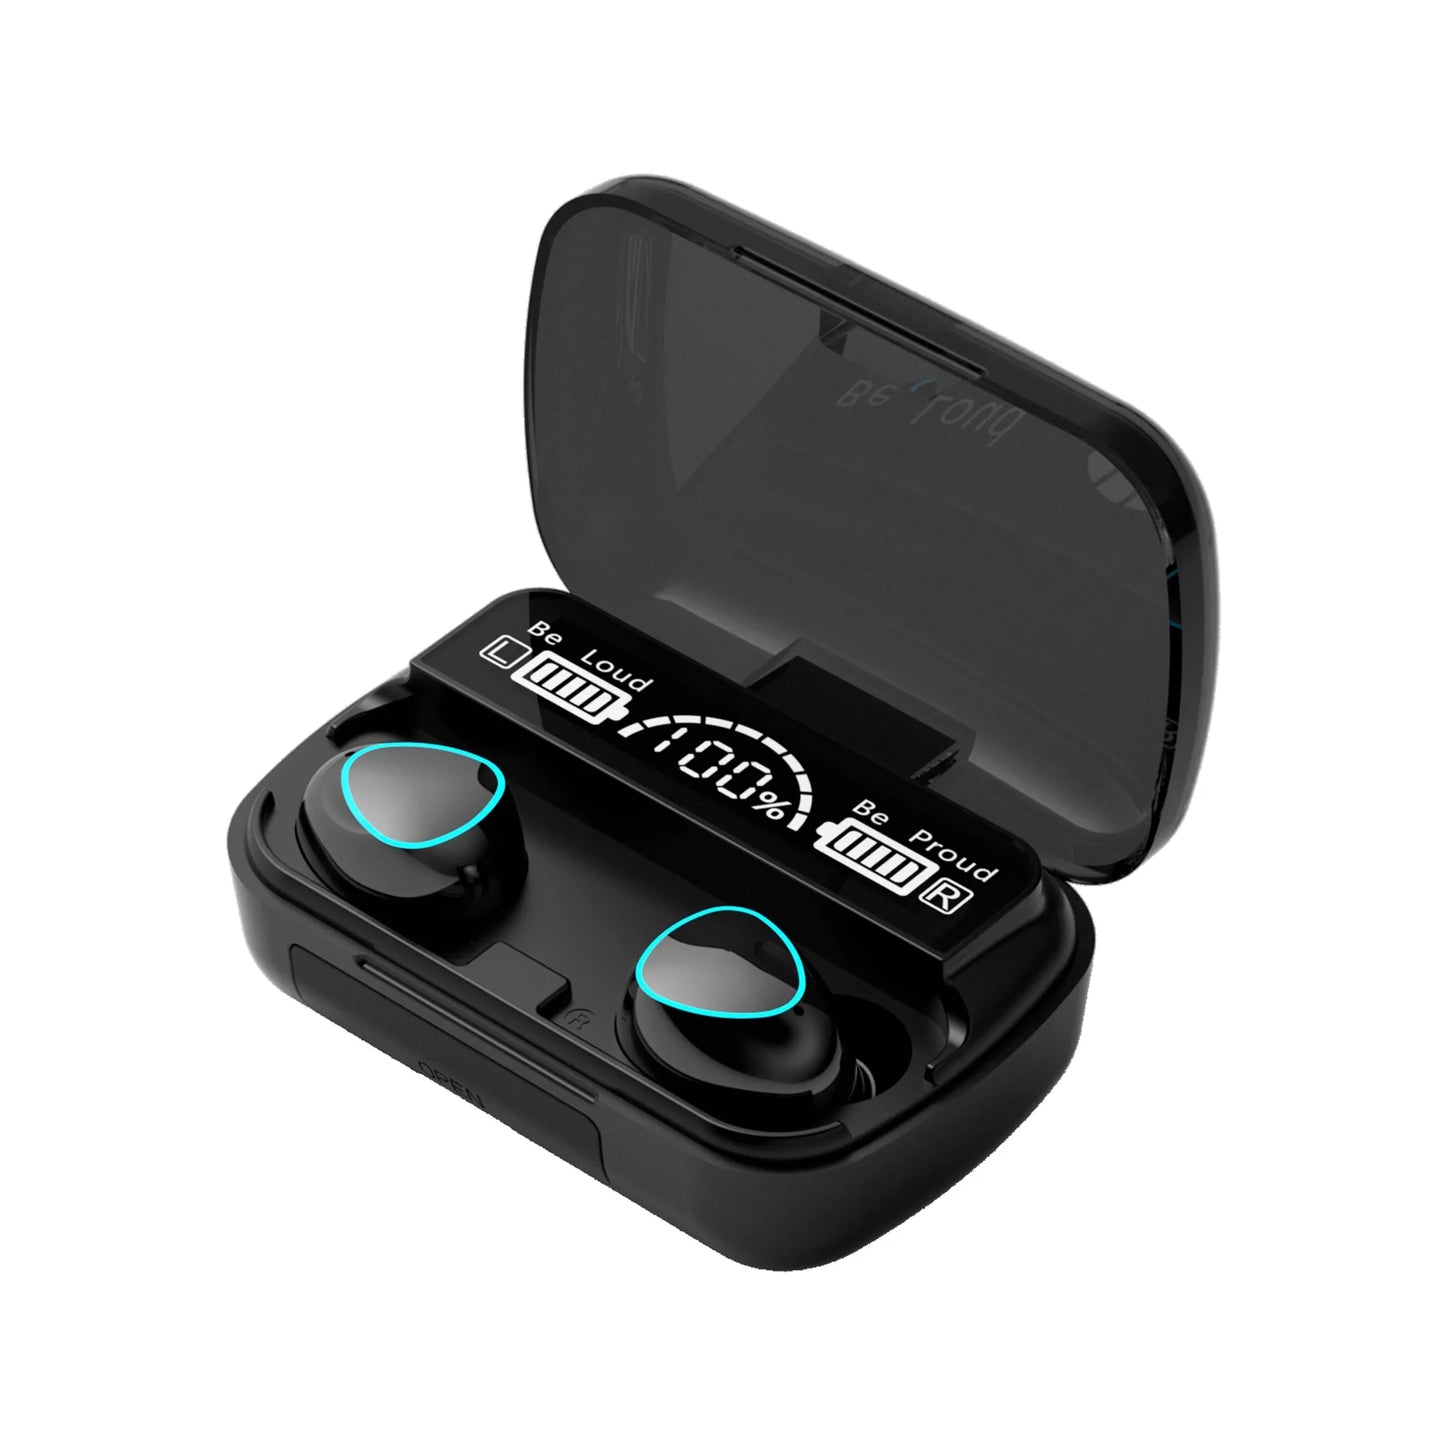 Bluetooth Waterproof Earbuds Headsets With Microphone